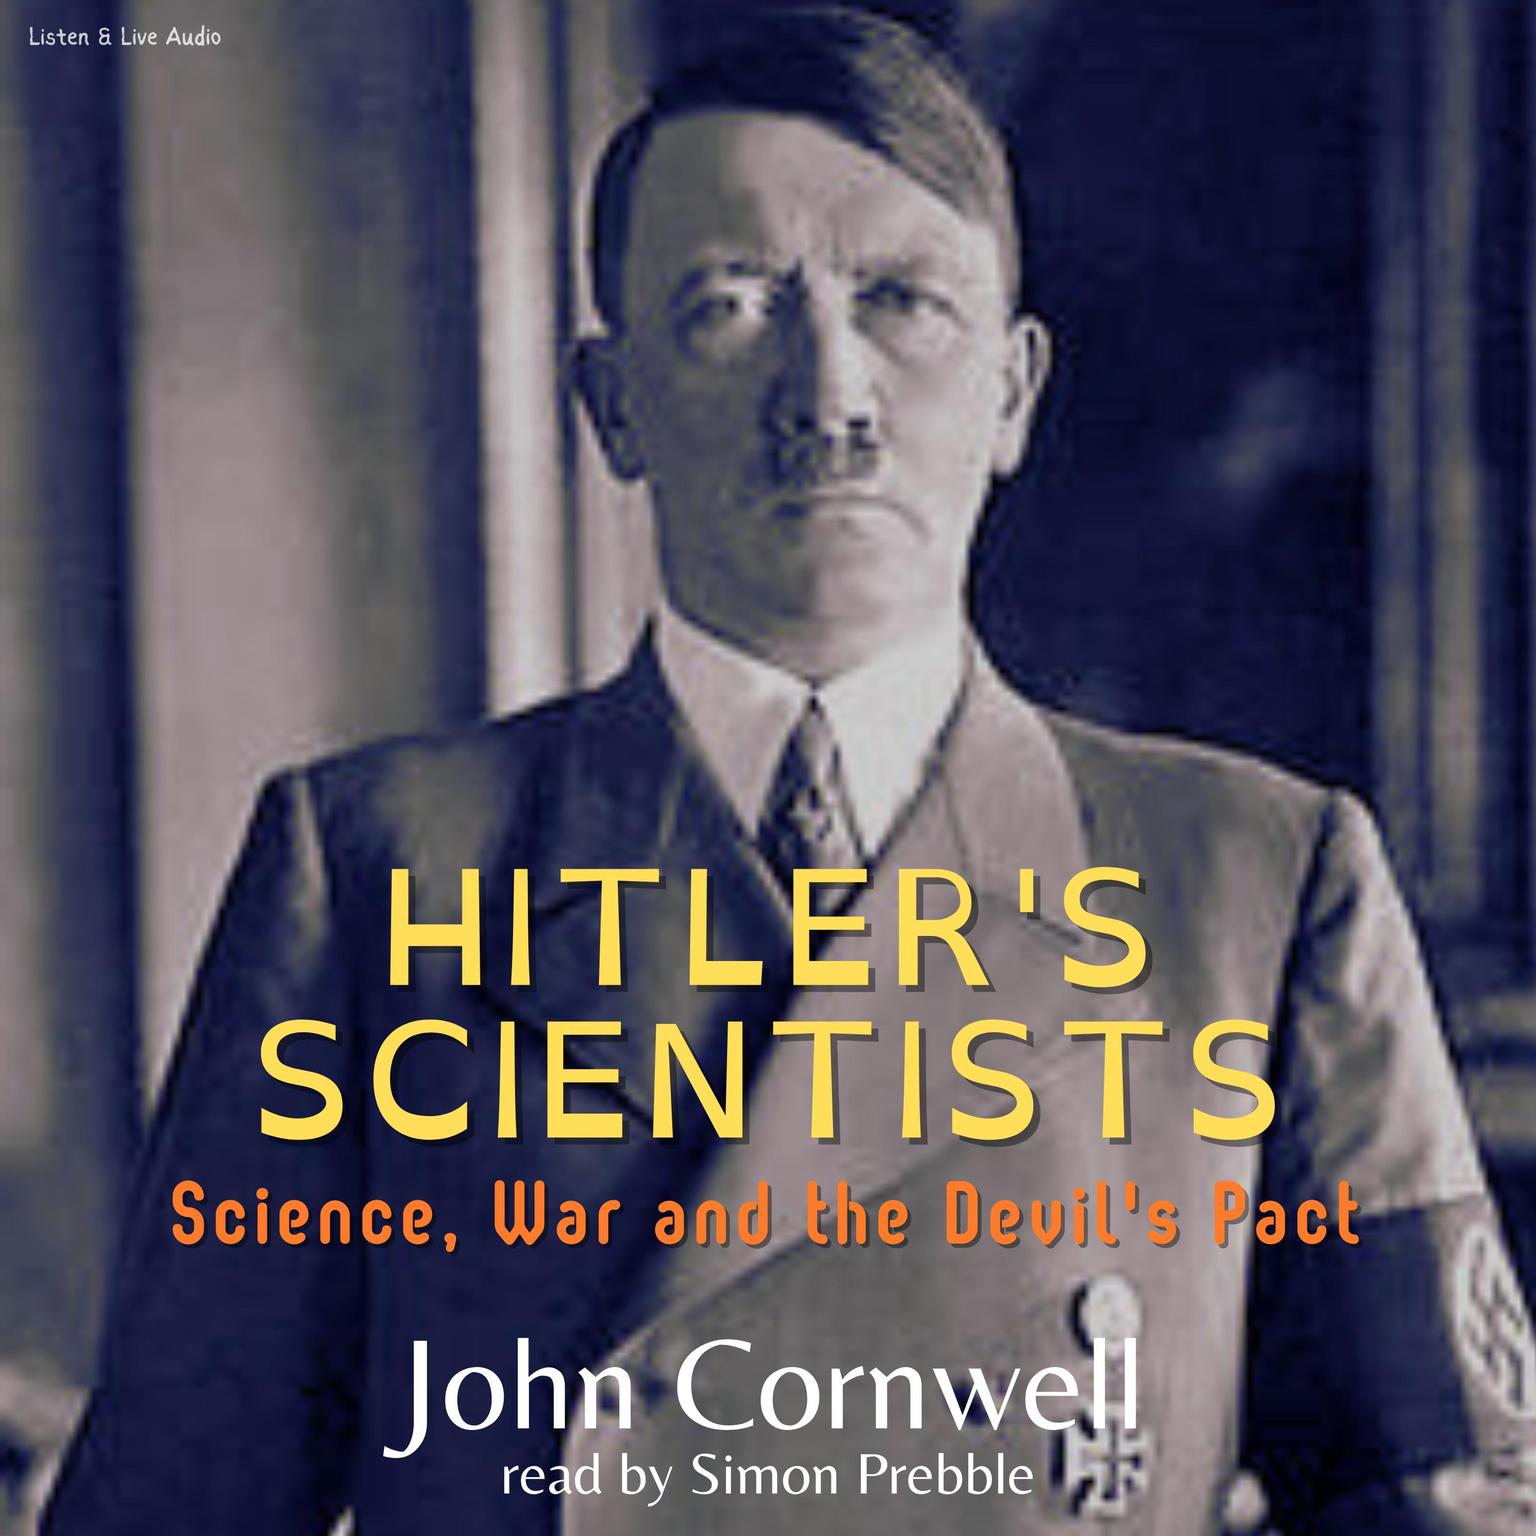 Hitler’s Scientists (Abridged): Science, War, and the Devil’s Pact Audiobook, by John Cornwell